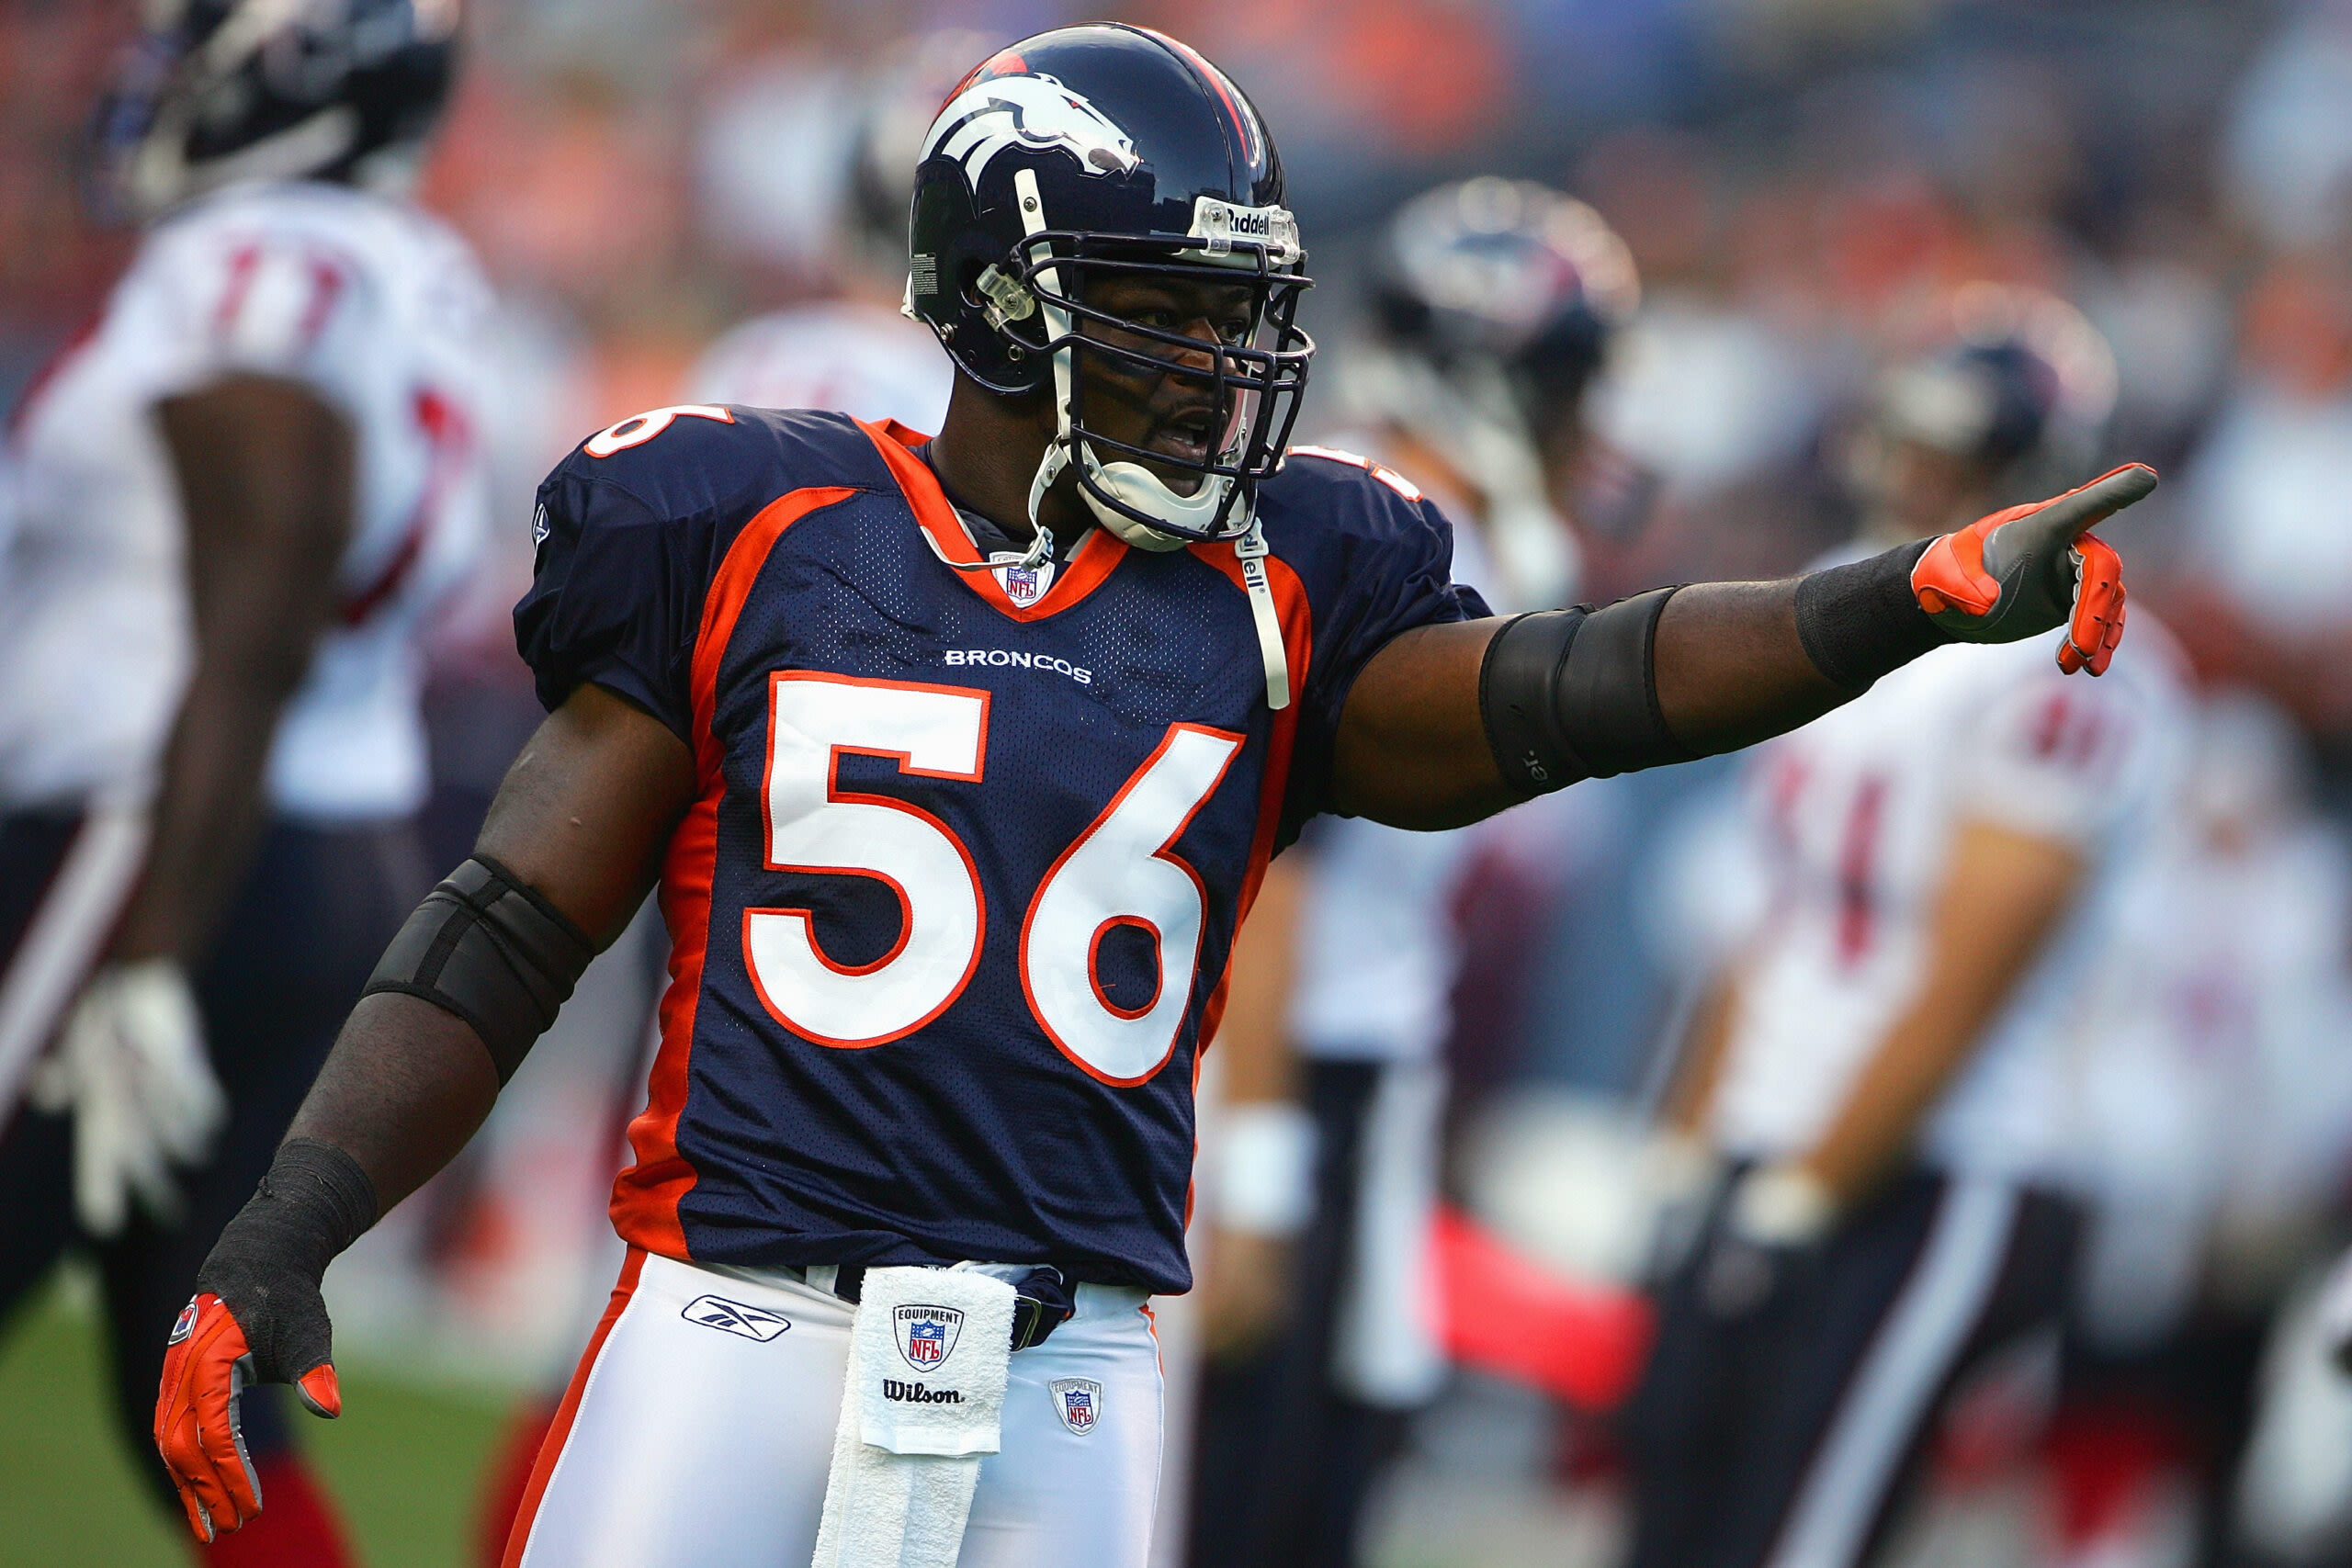 Al Wilson was the best player to wear No. 56 for the Broncos